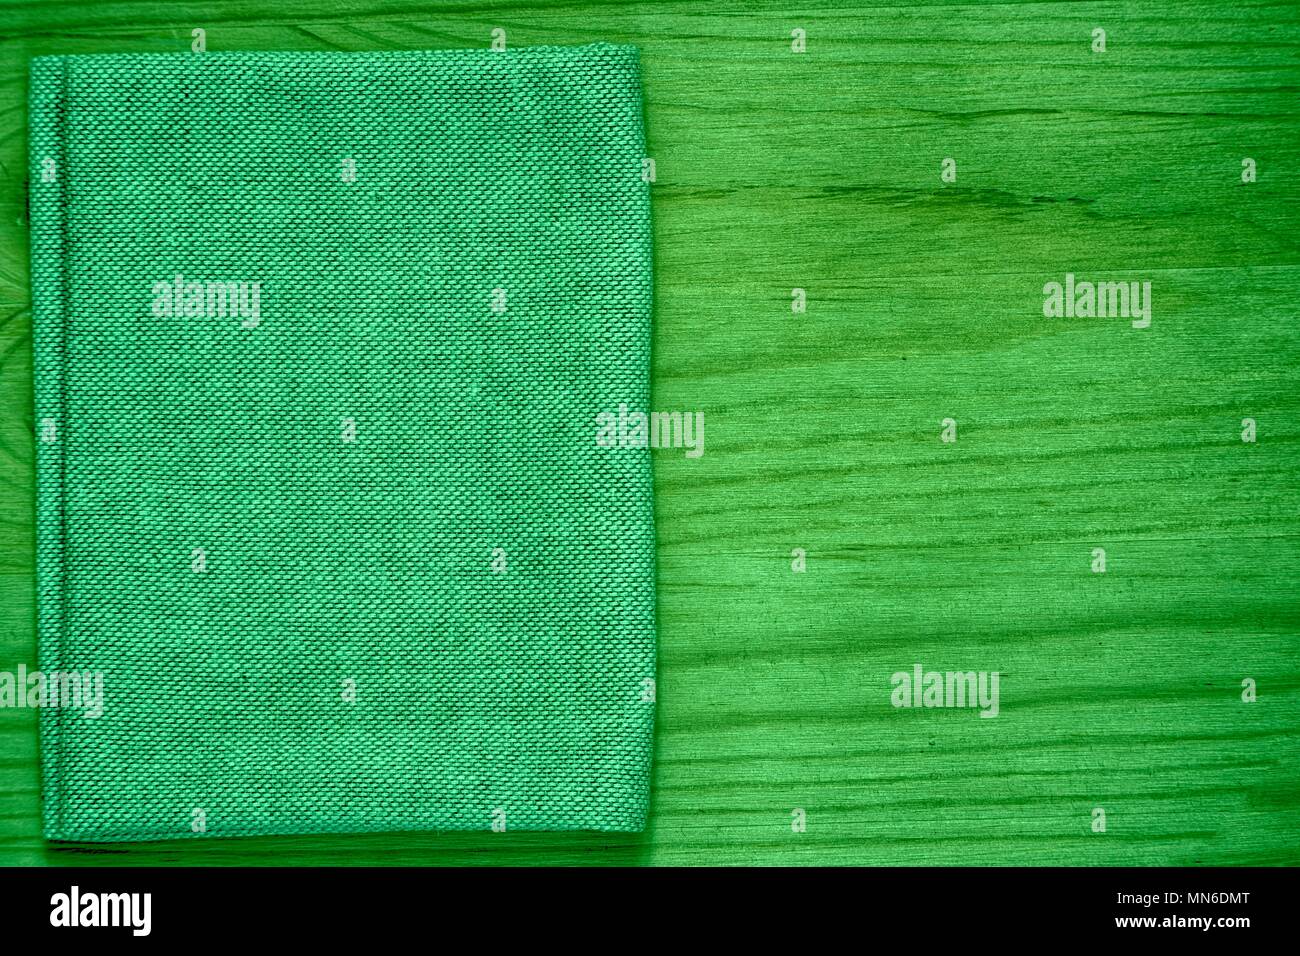 Ultra green Postcard sample, linen fabric surface on wooden table with free copyspace for greeting text, for mock-up or designer use, book cover sampl Stock Photo